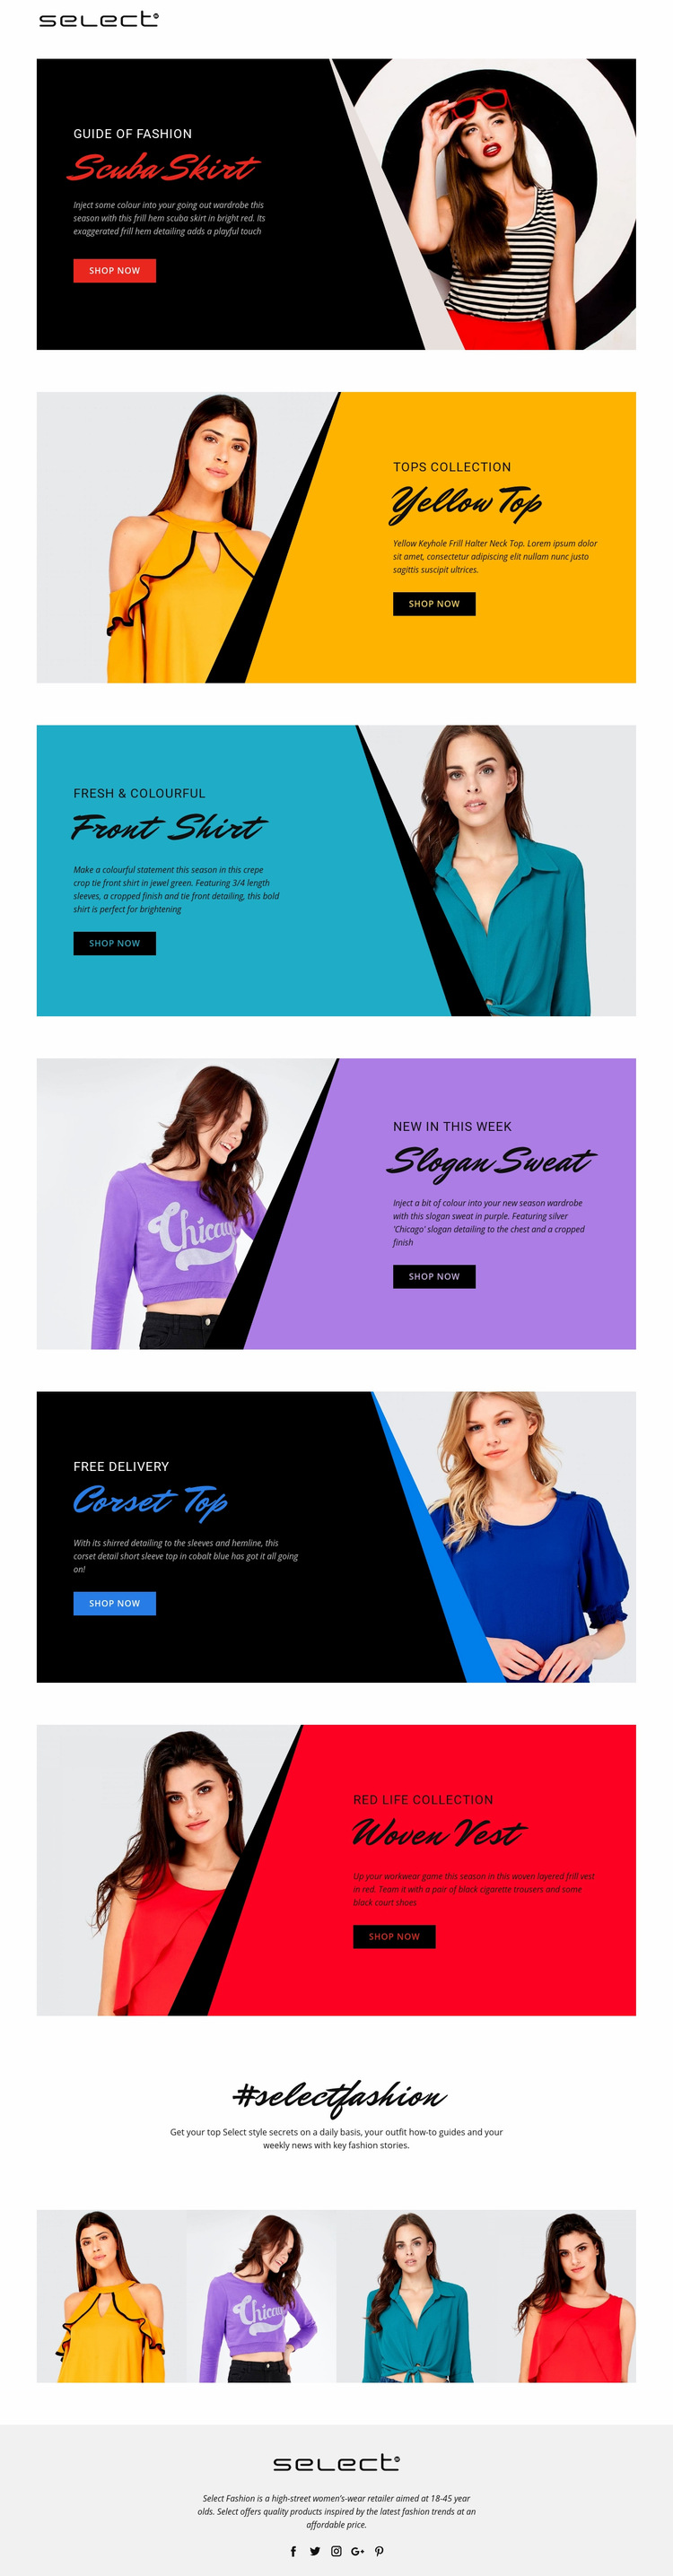 Learn about dress codes Web Page Design